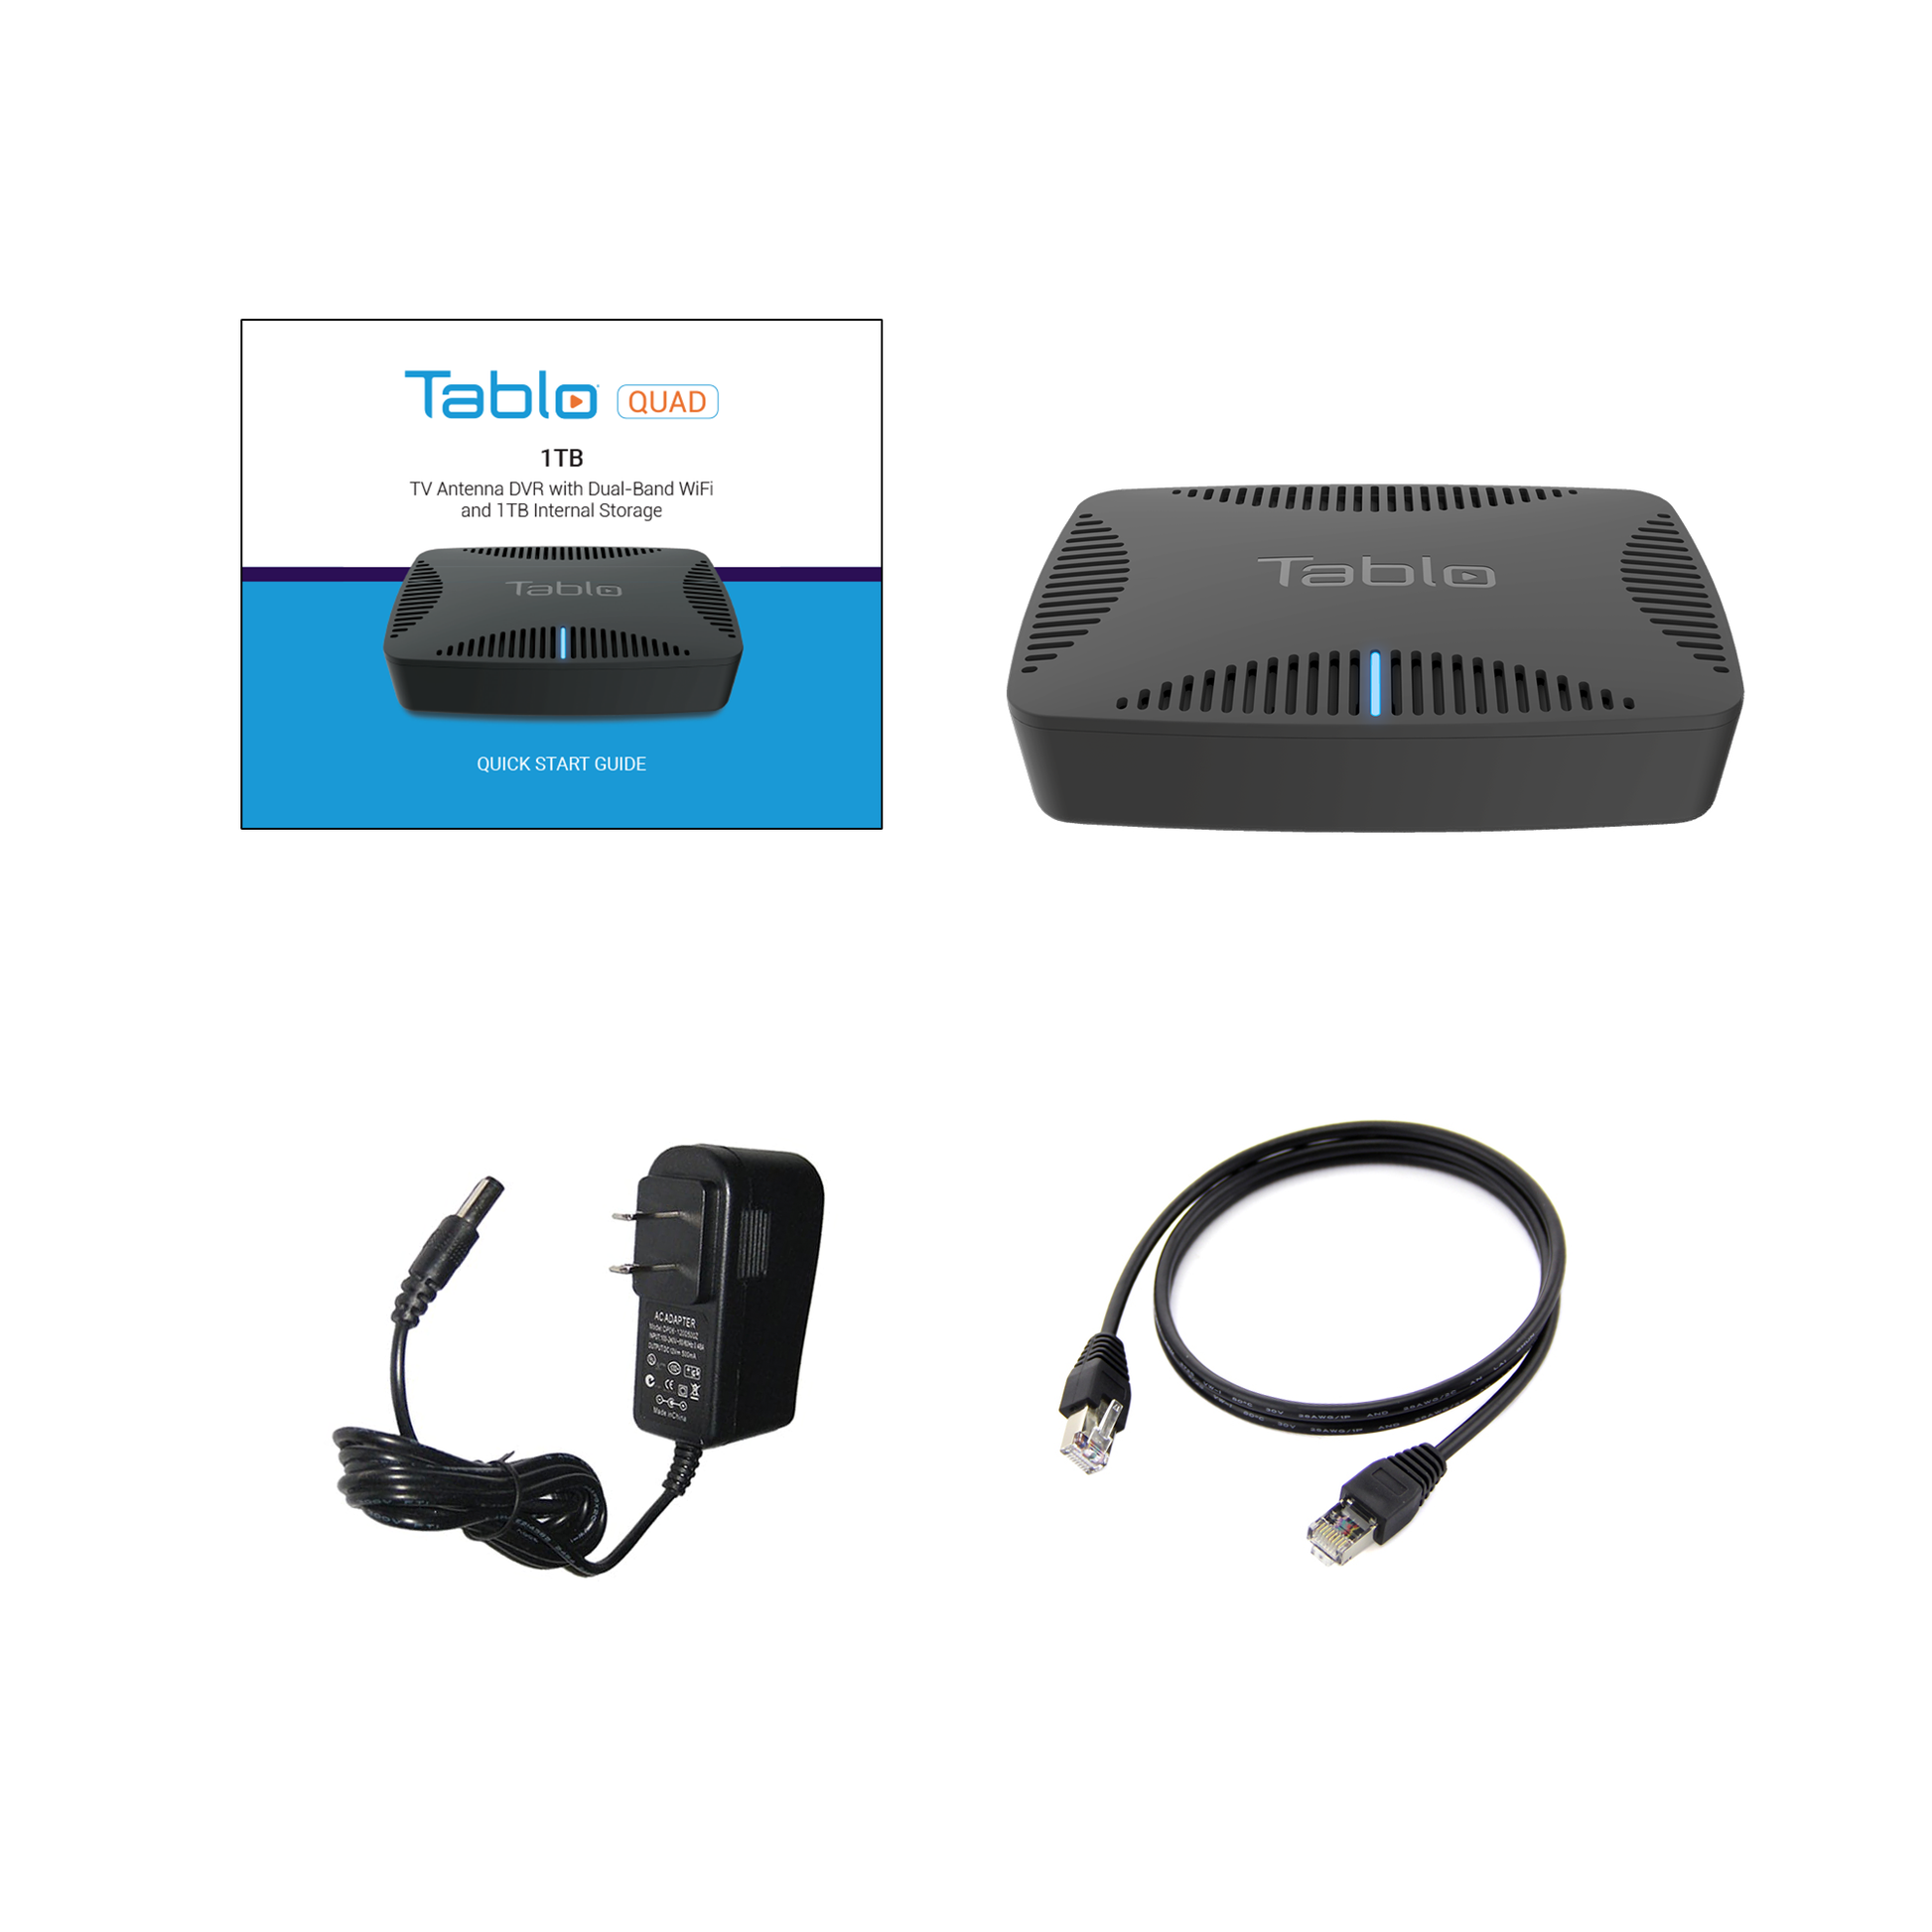 Tablo QUAD 1TB Over-The-Air (OTA) DVR (Digital Video Recorder) for Cord Cutters. What's in the box: Quick Start Guide, Tablo DVR, power adapter, ethernet cable.